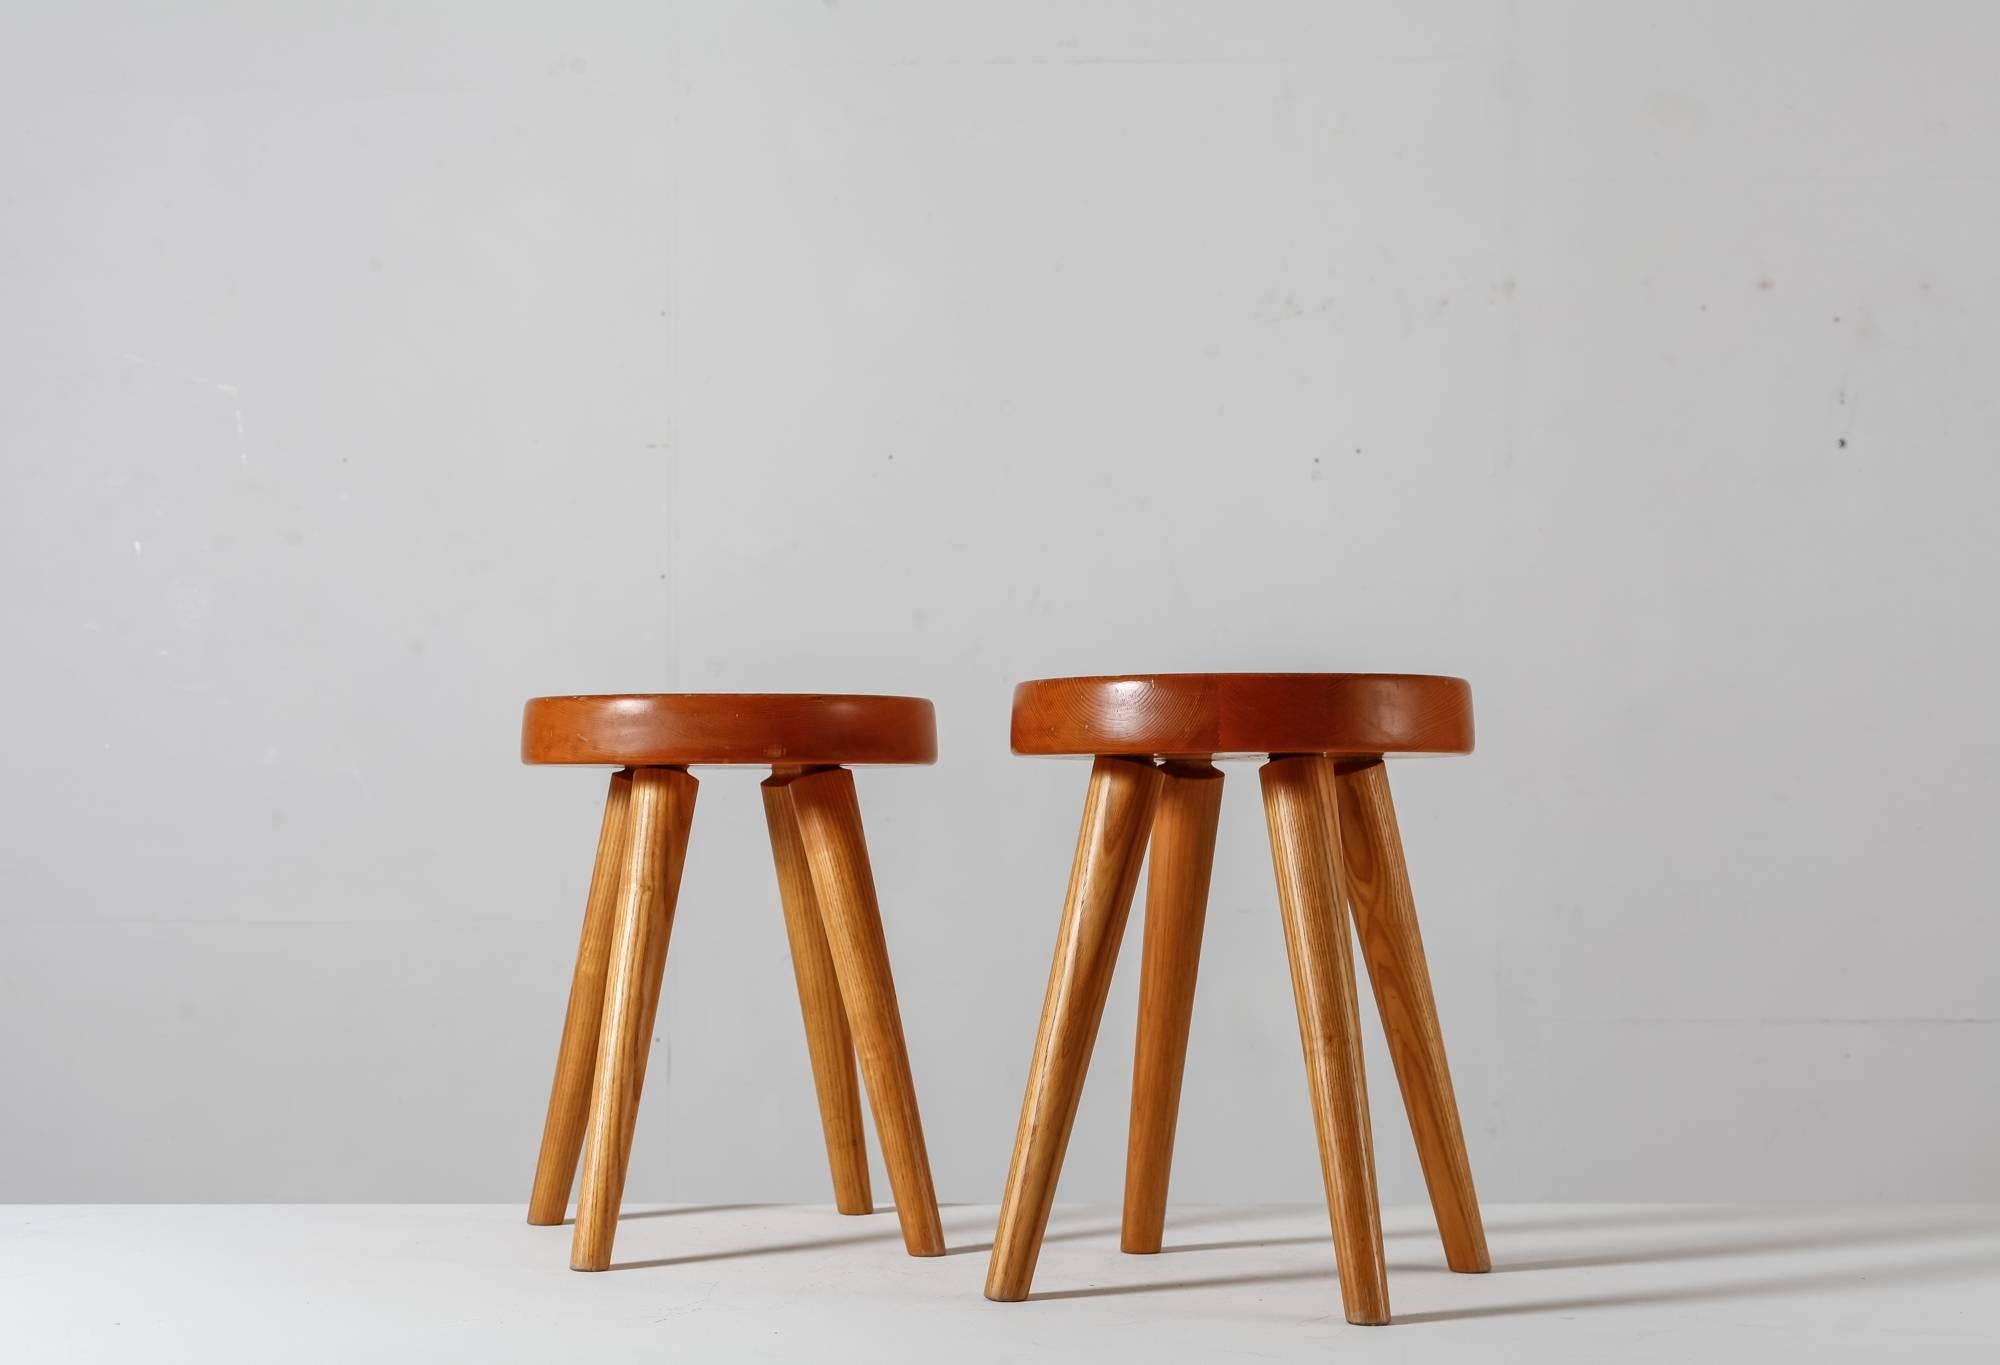 A pair of Charlotte Perriand four-legged stools made of pine. These stools were produced by Steph Simon.